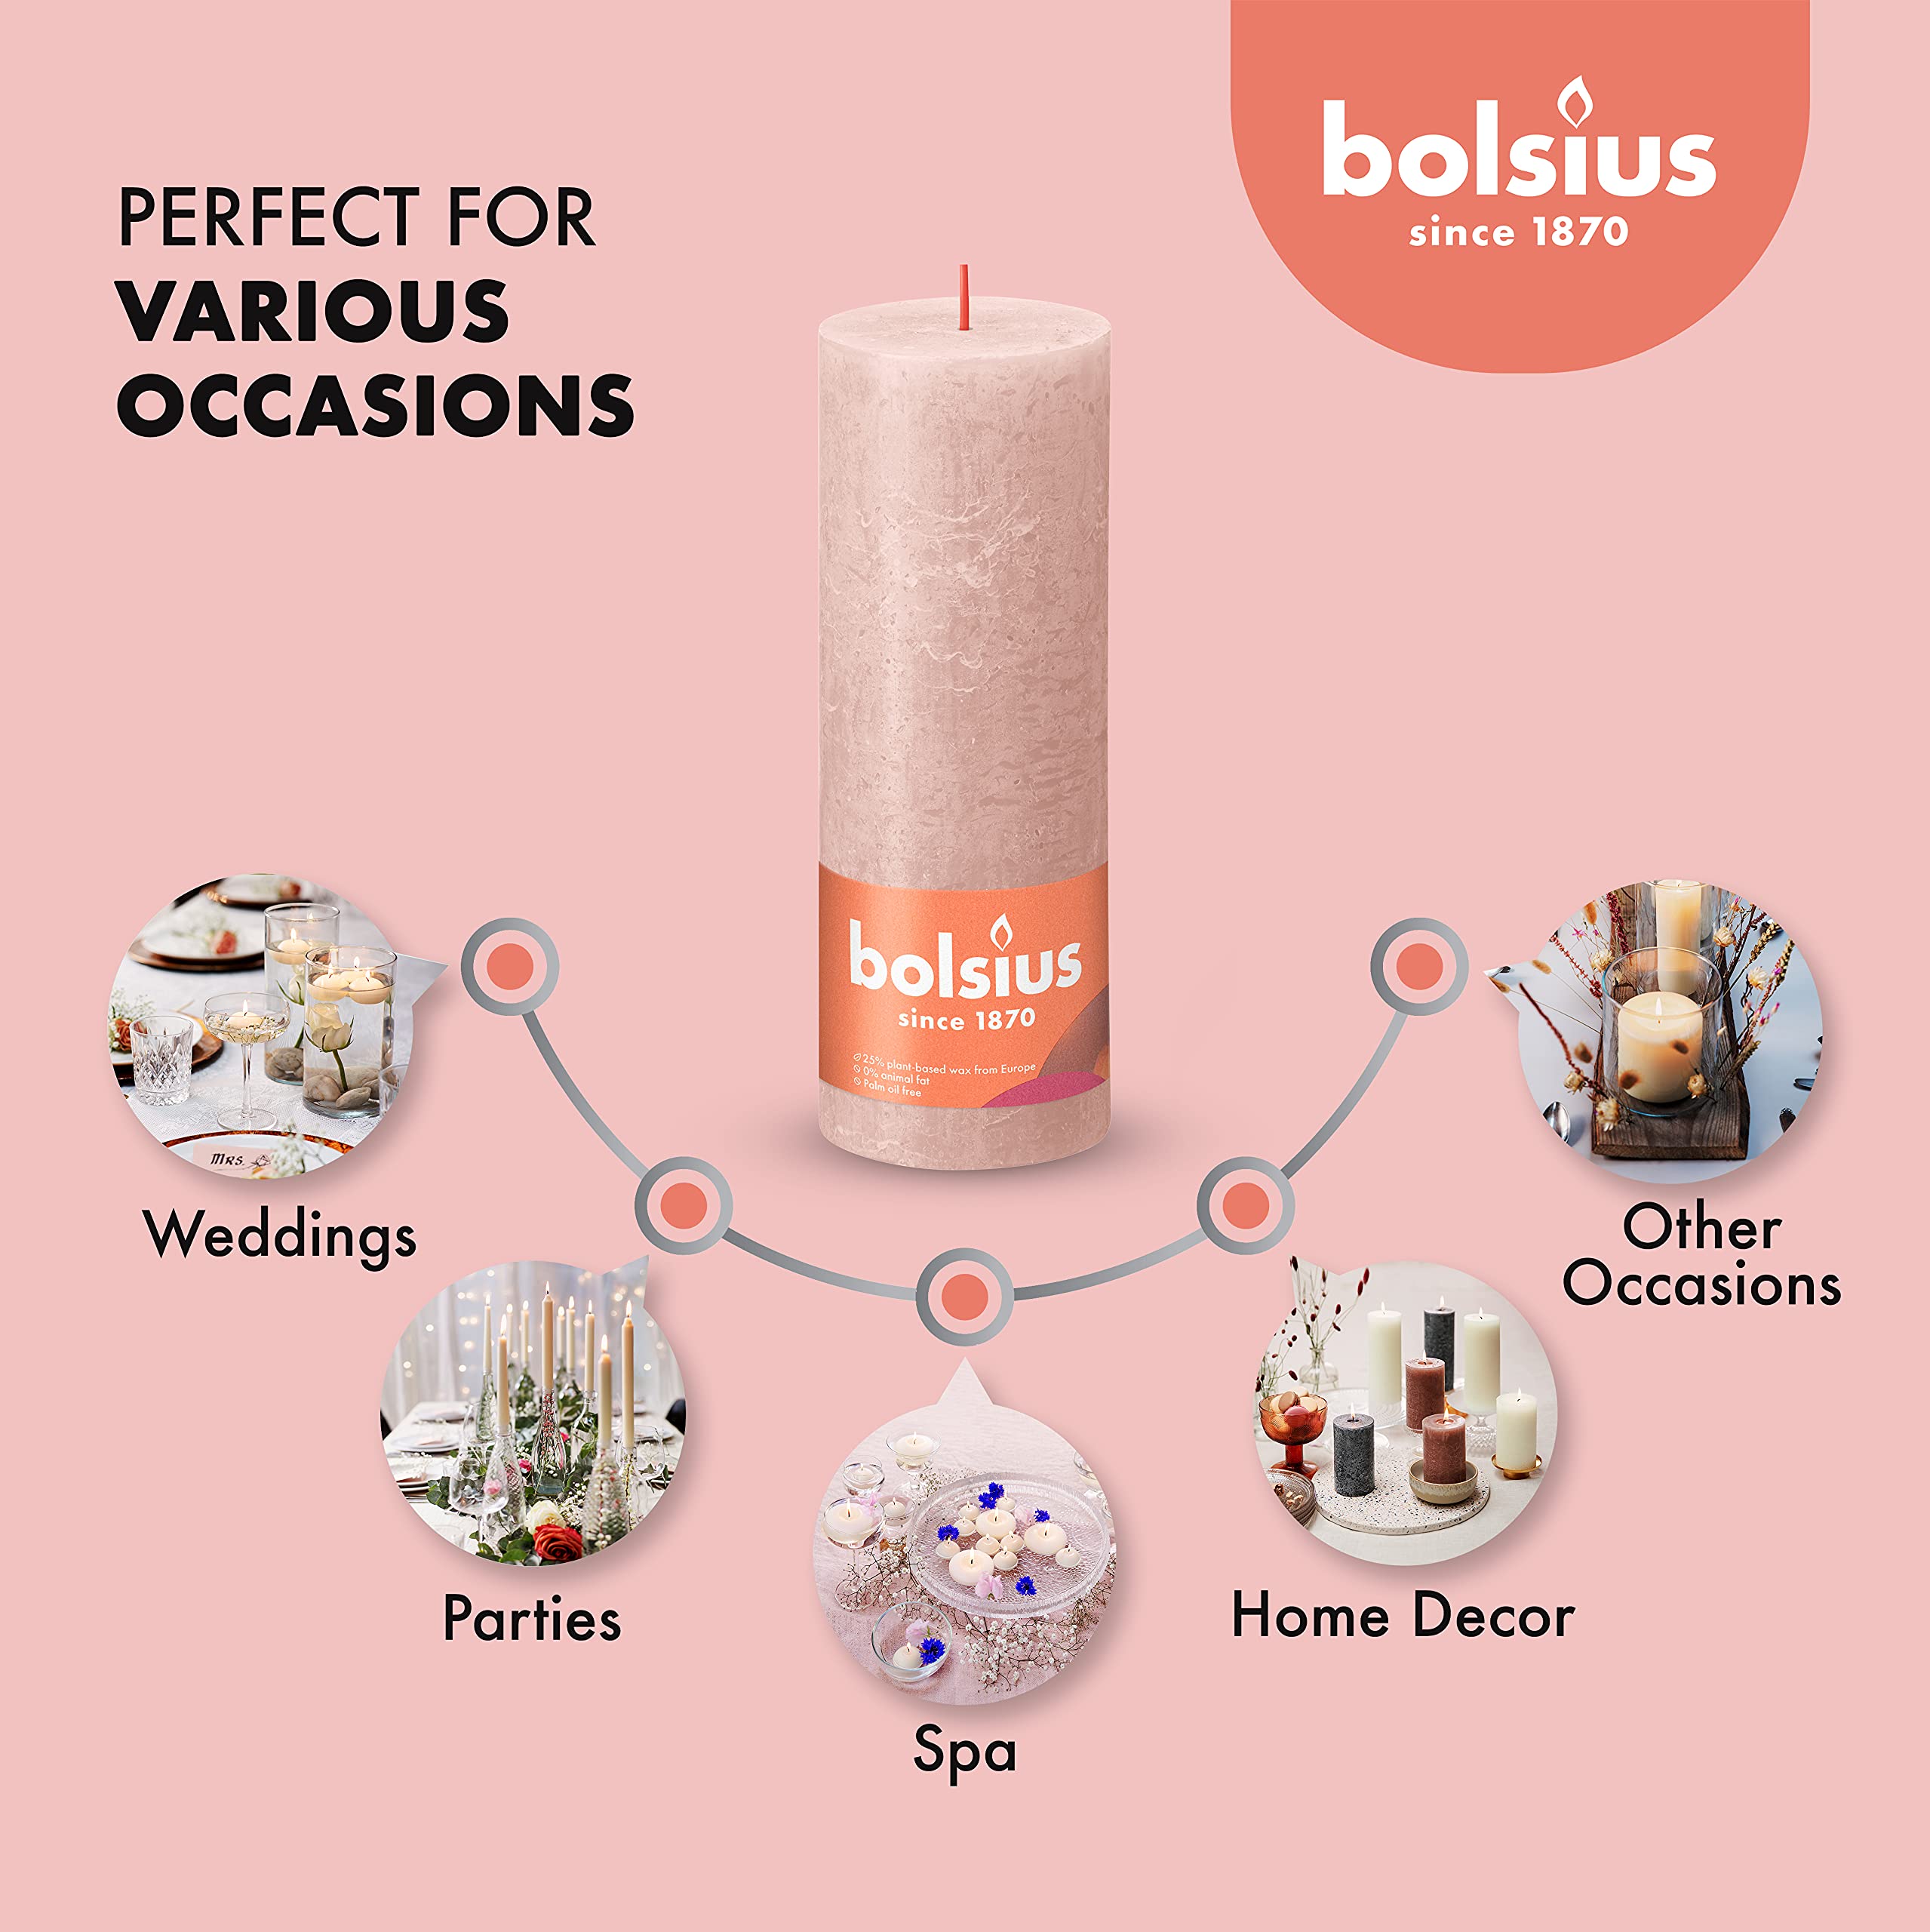 BOLSIUS 4 Pack Misty Pink Rustic Pillar Candles - 2.75 X 7.5 Inches - Premium European Quality - Includes Natural Plant-Based Wax - Unscented Dripless Smokeless 85 Hour Party and Wedding Candles  - Very Good